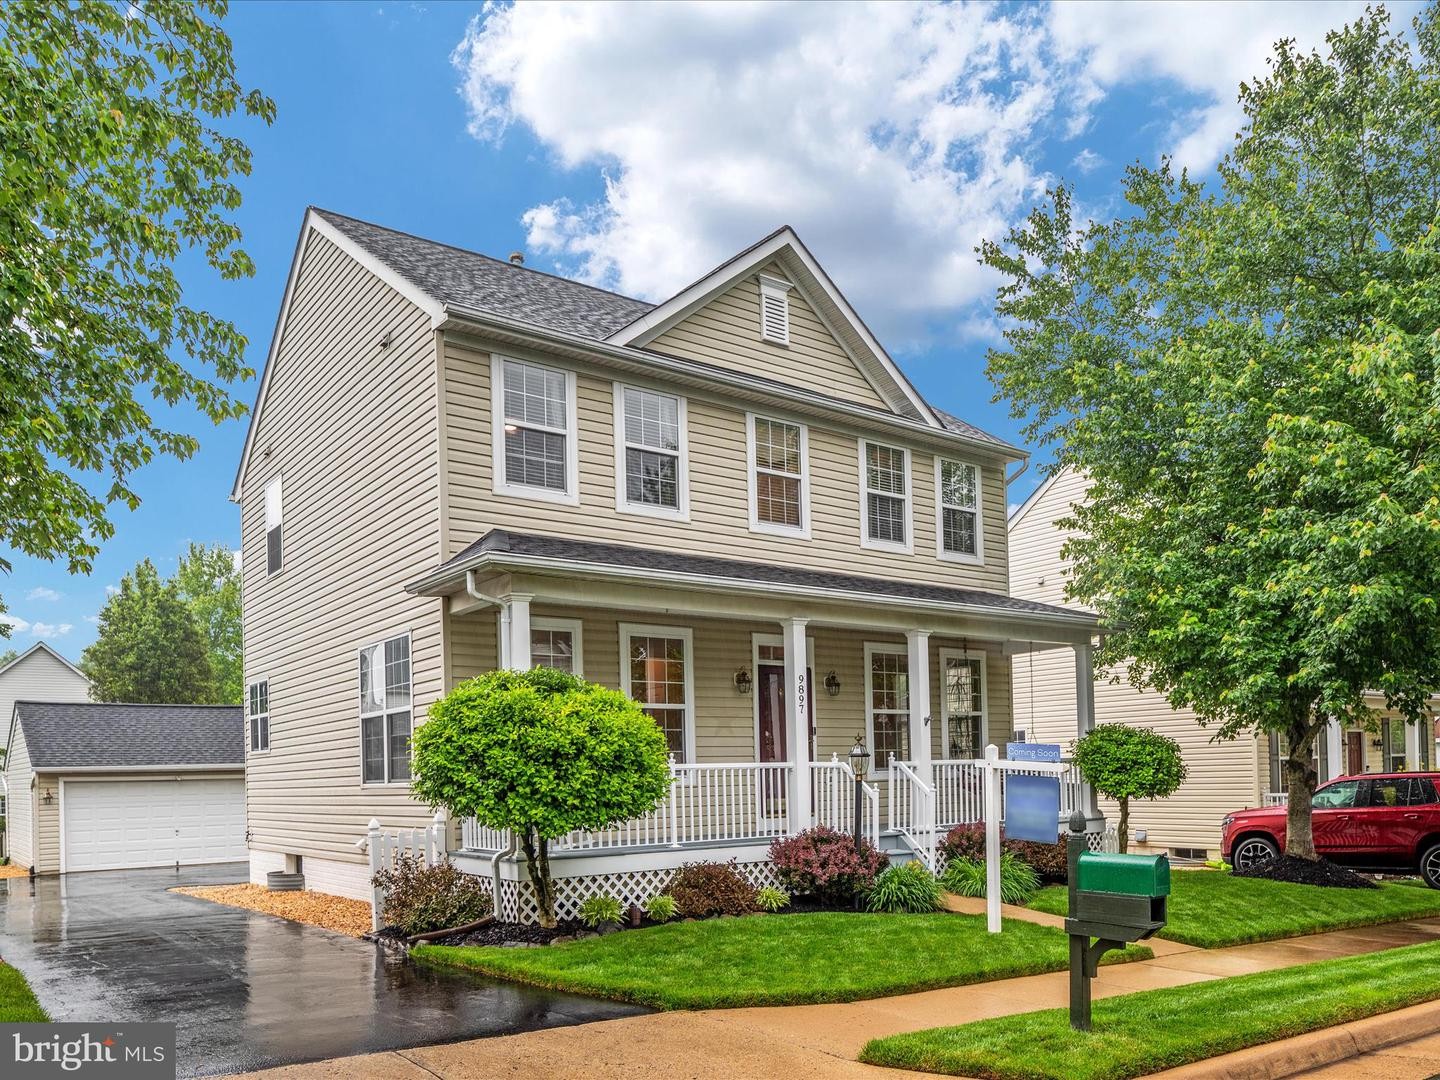 2. 9897 Airedale Ct